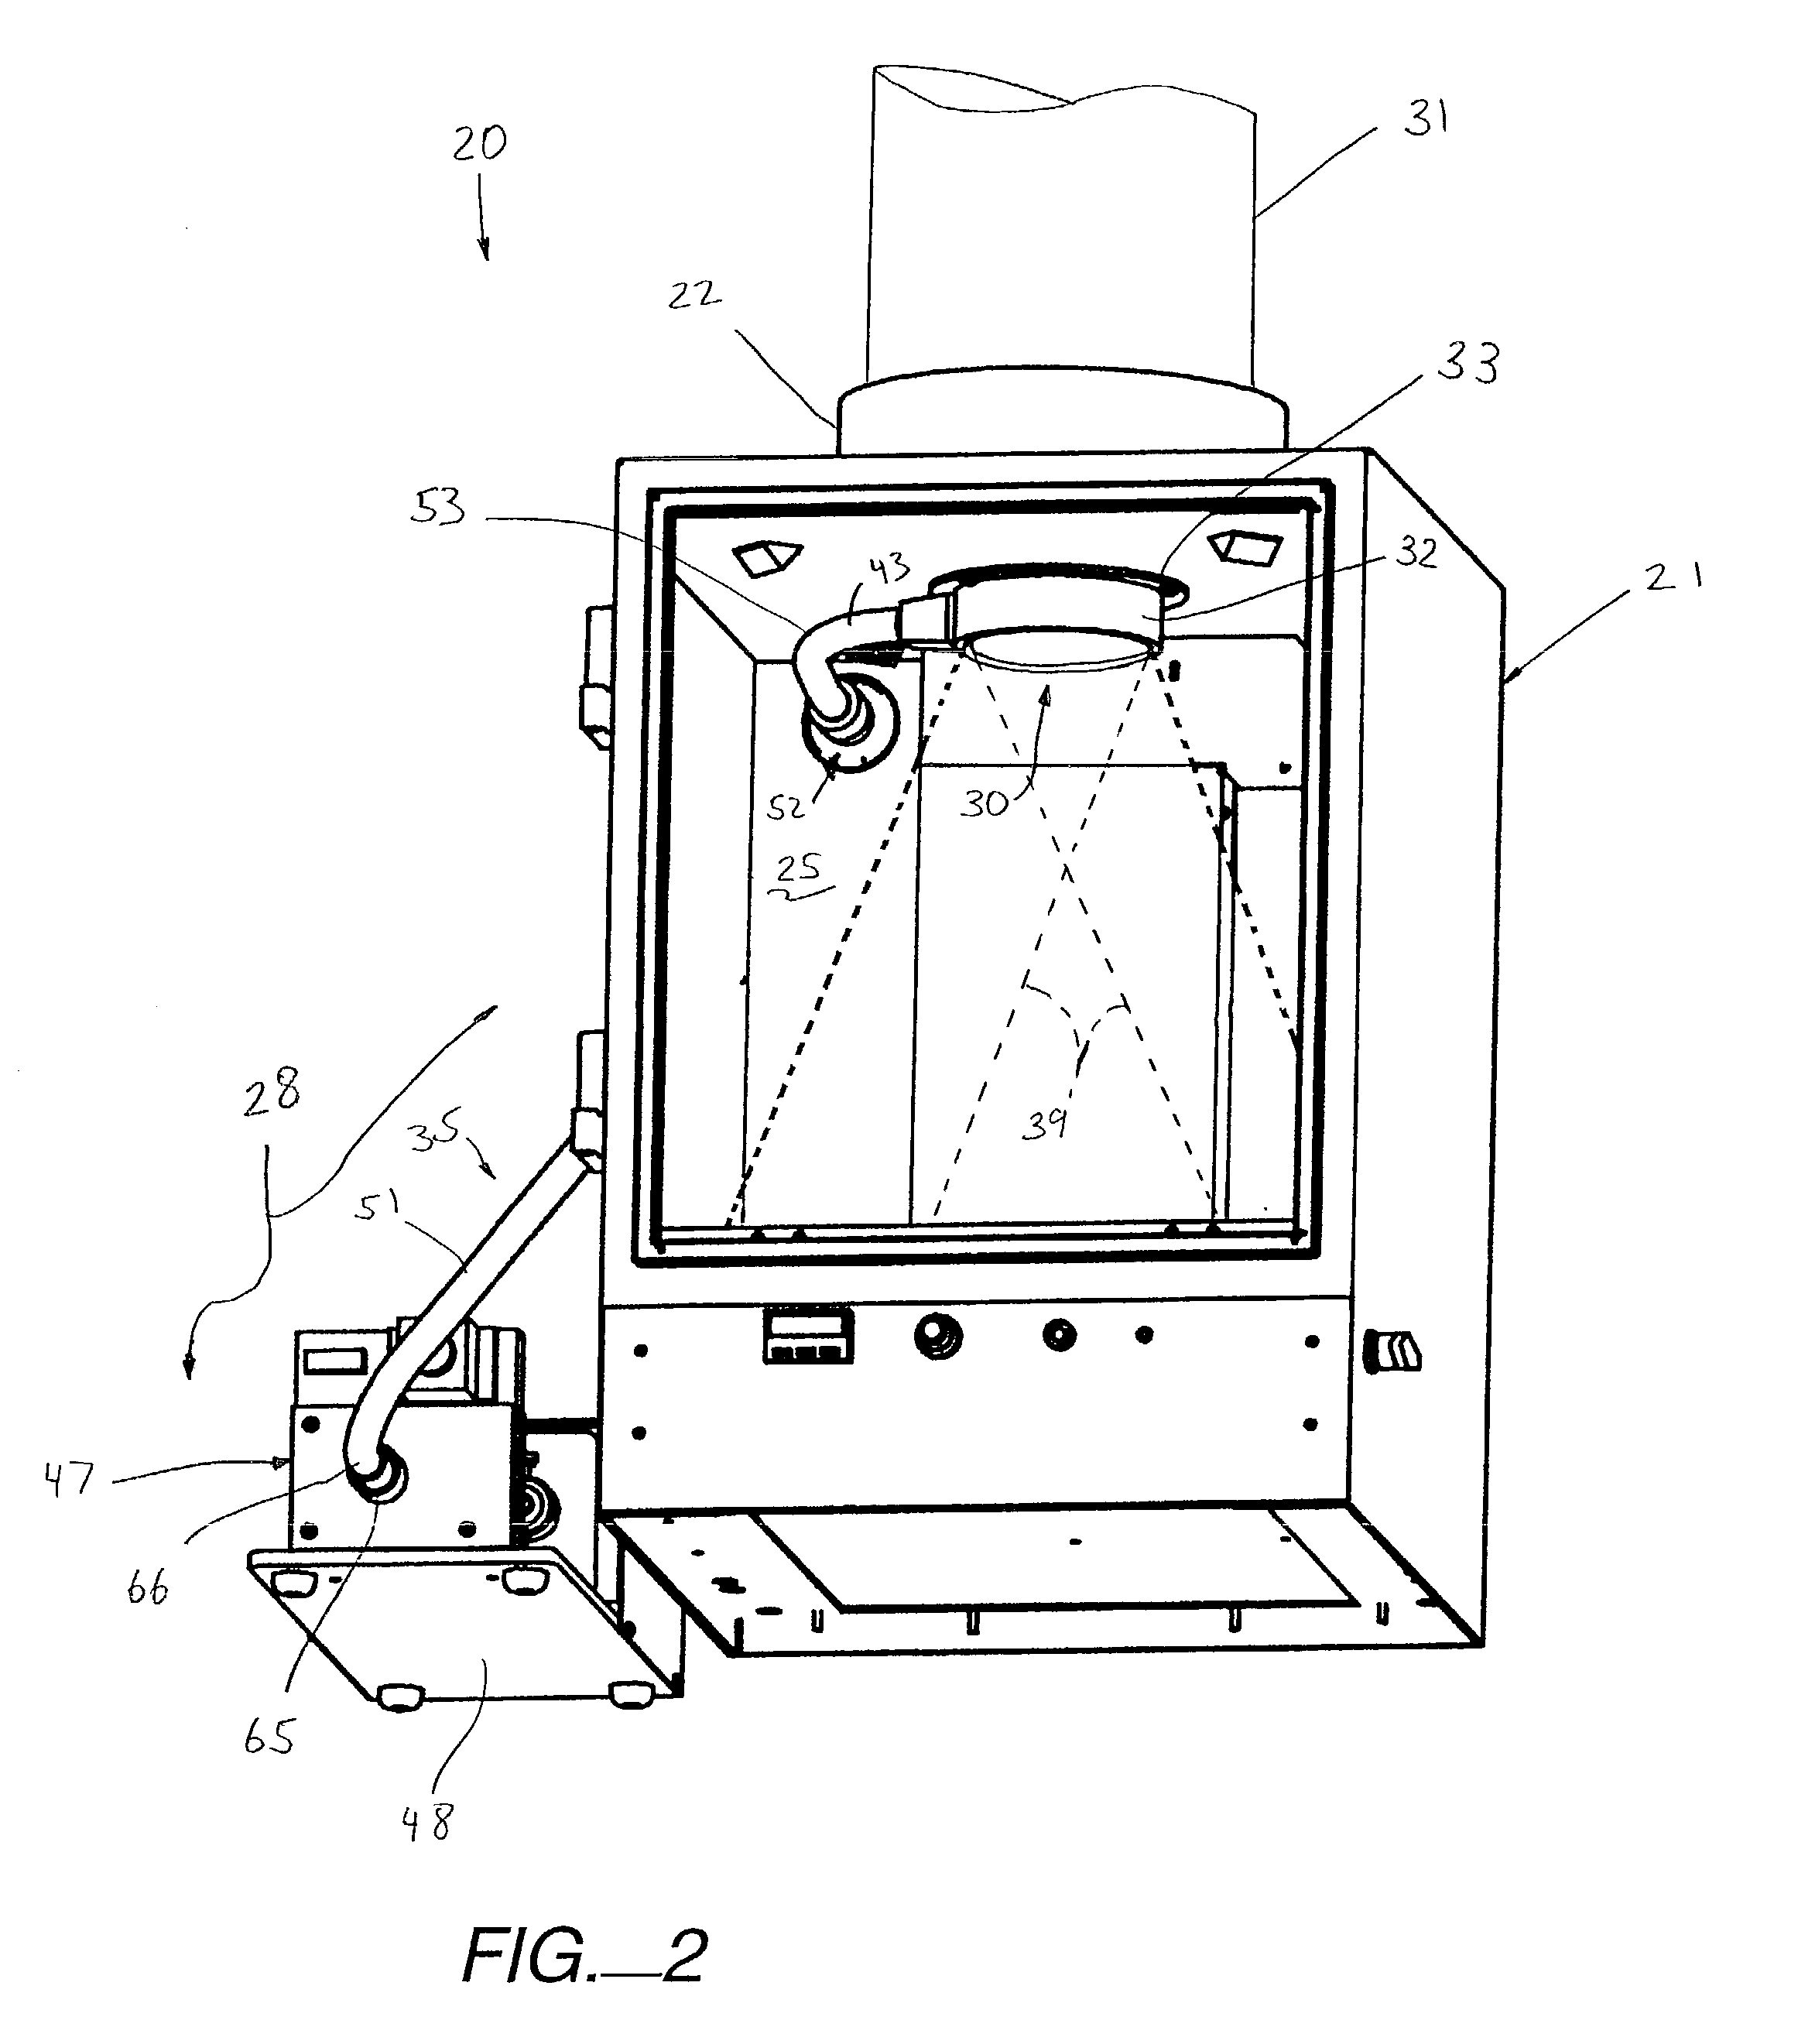 Fluorescence illumination assembly for an imaging apparatus